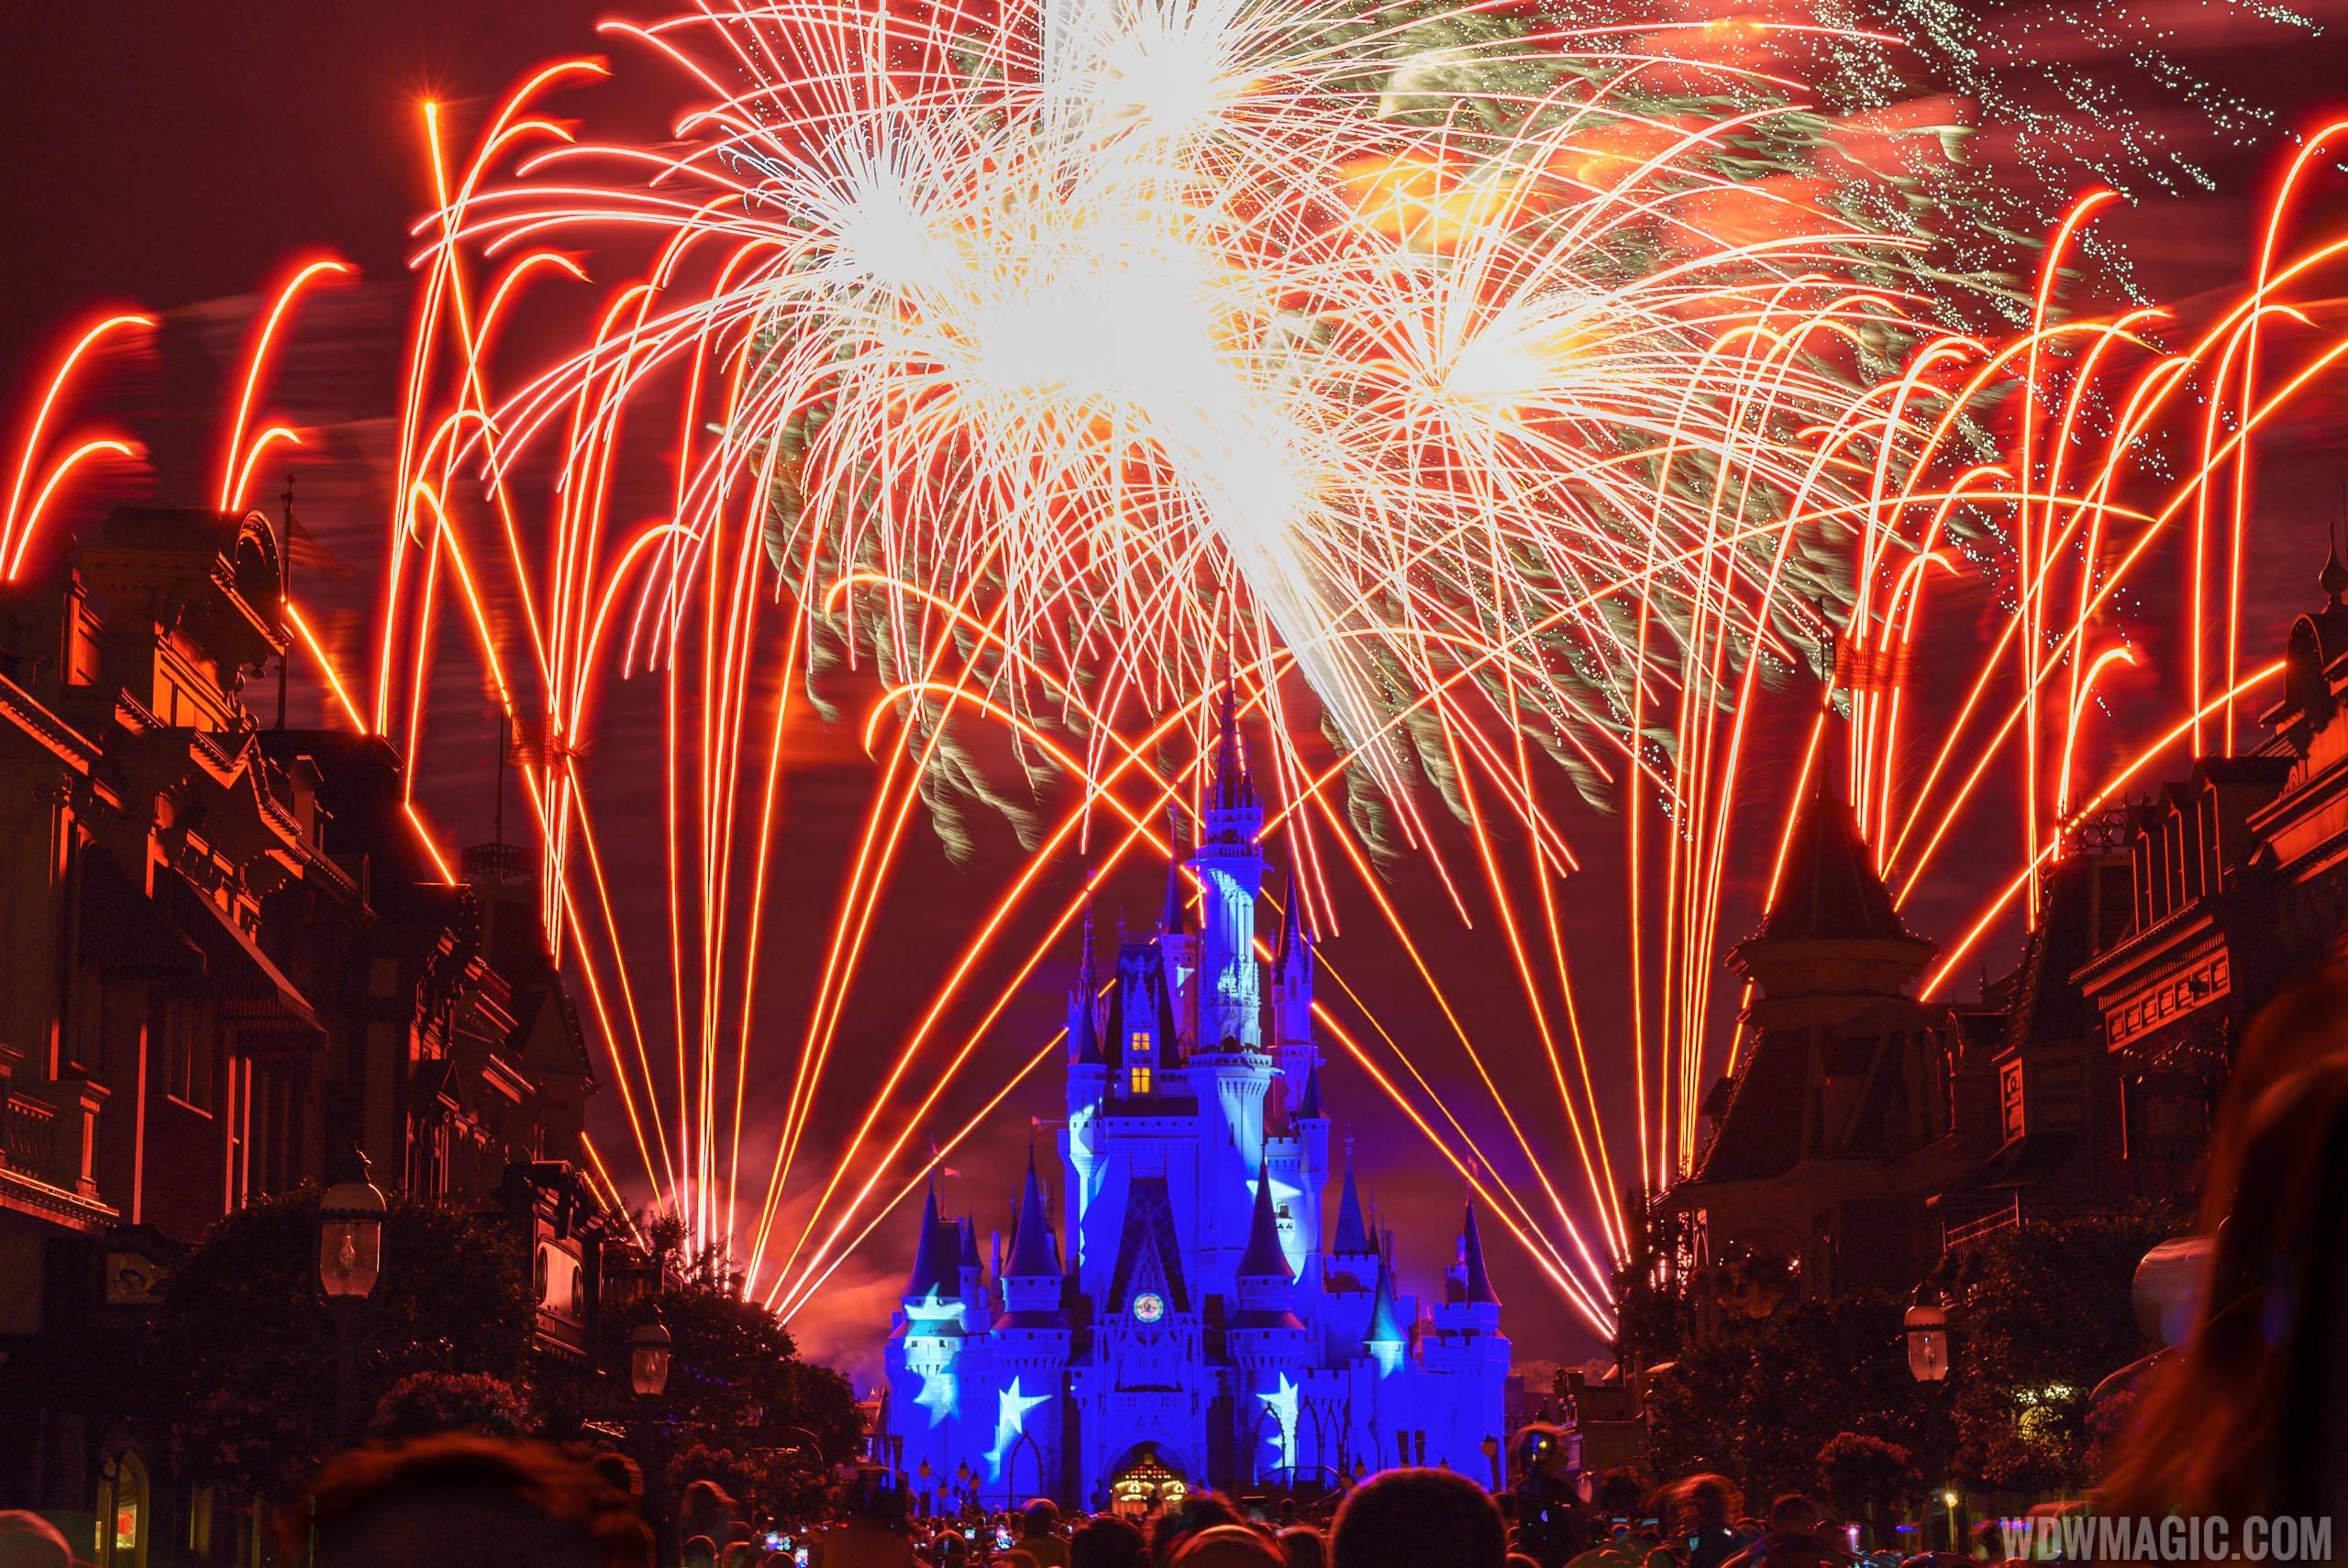 No firework shows are currently taking place at Walt Disney World